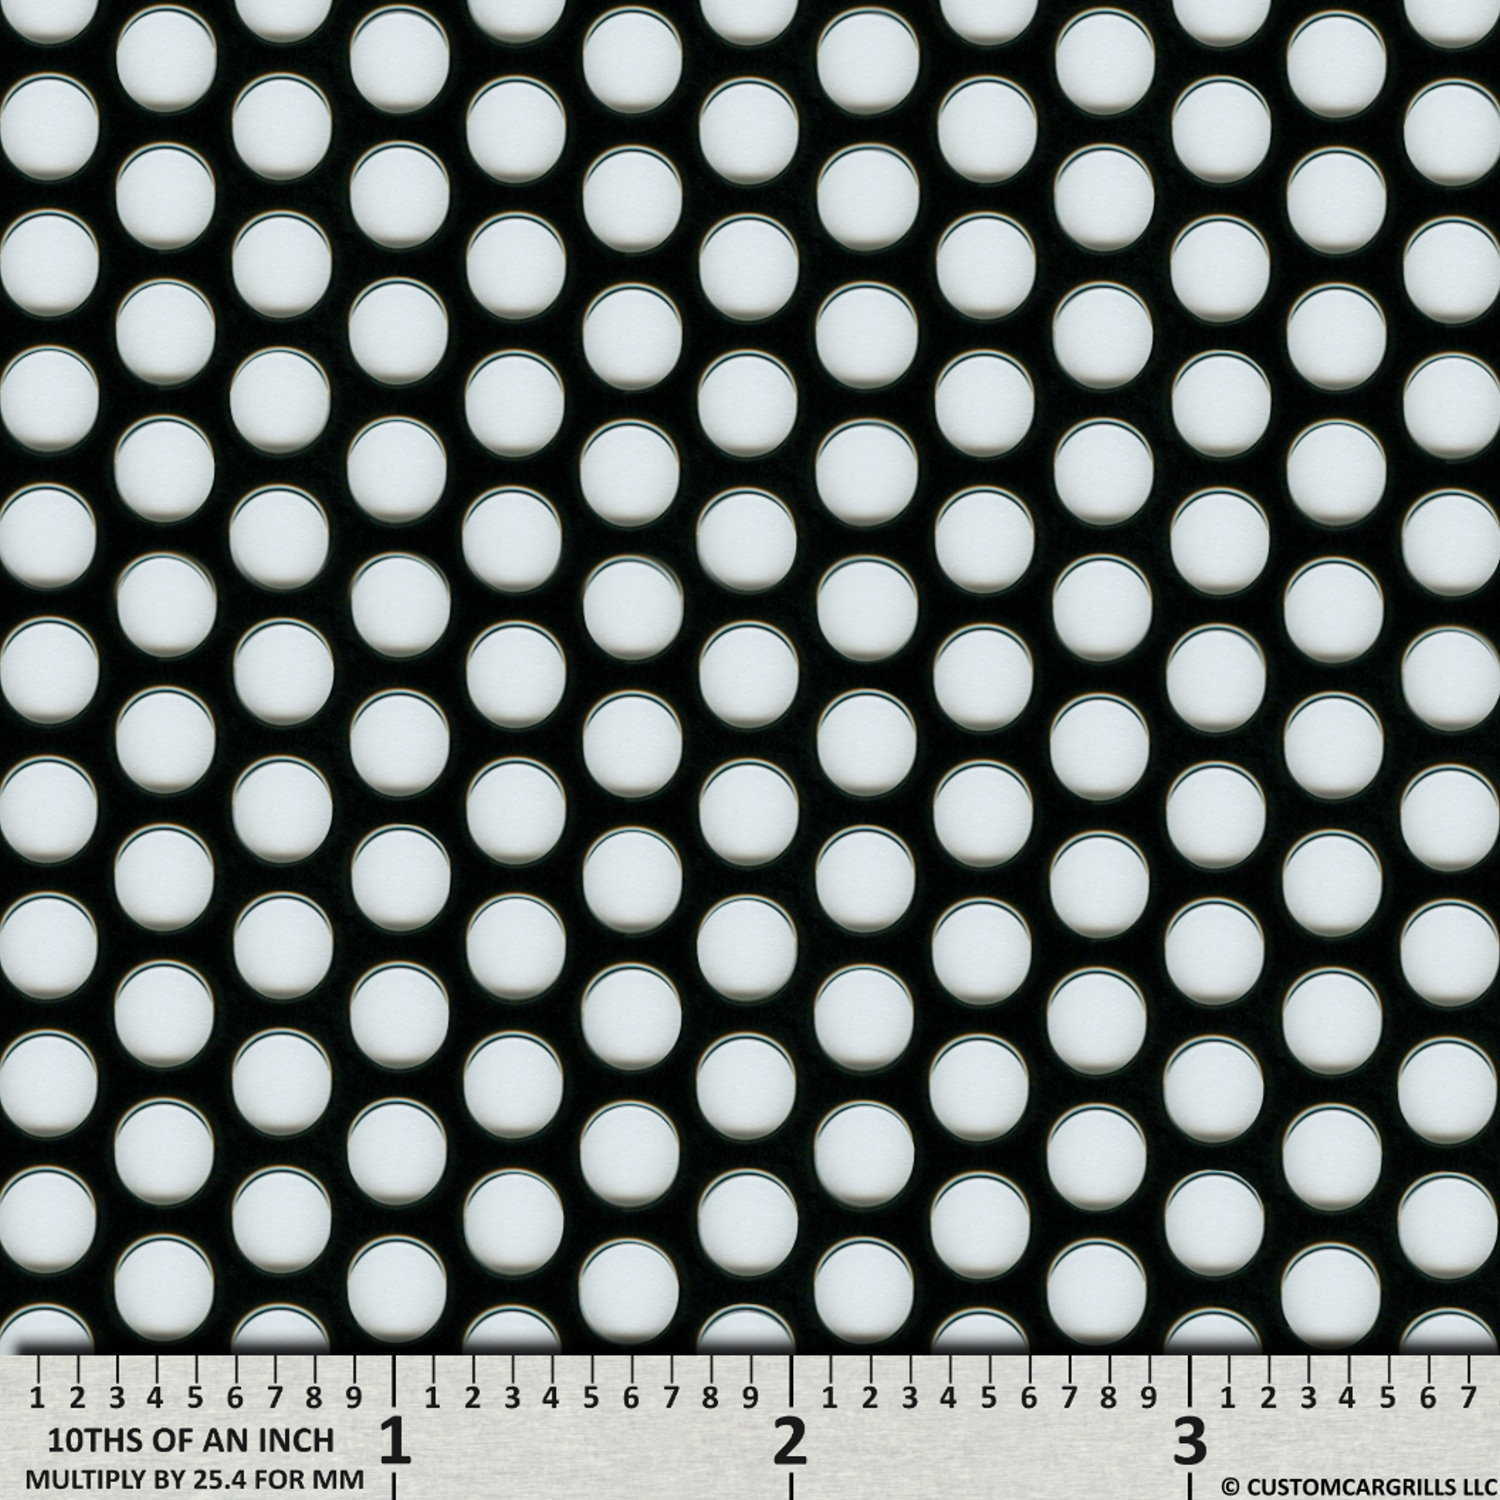 6in. x 36in. Small Perforated Grill Mesh Sheet - Gloss Black #1